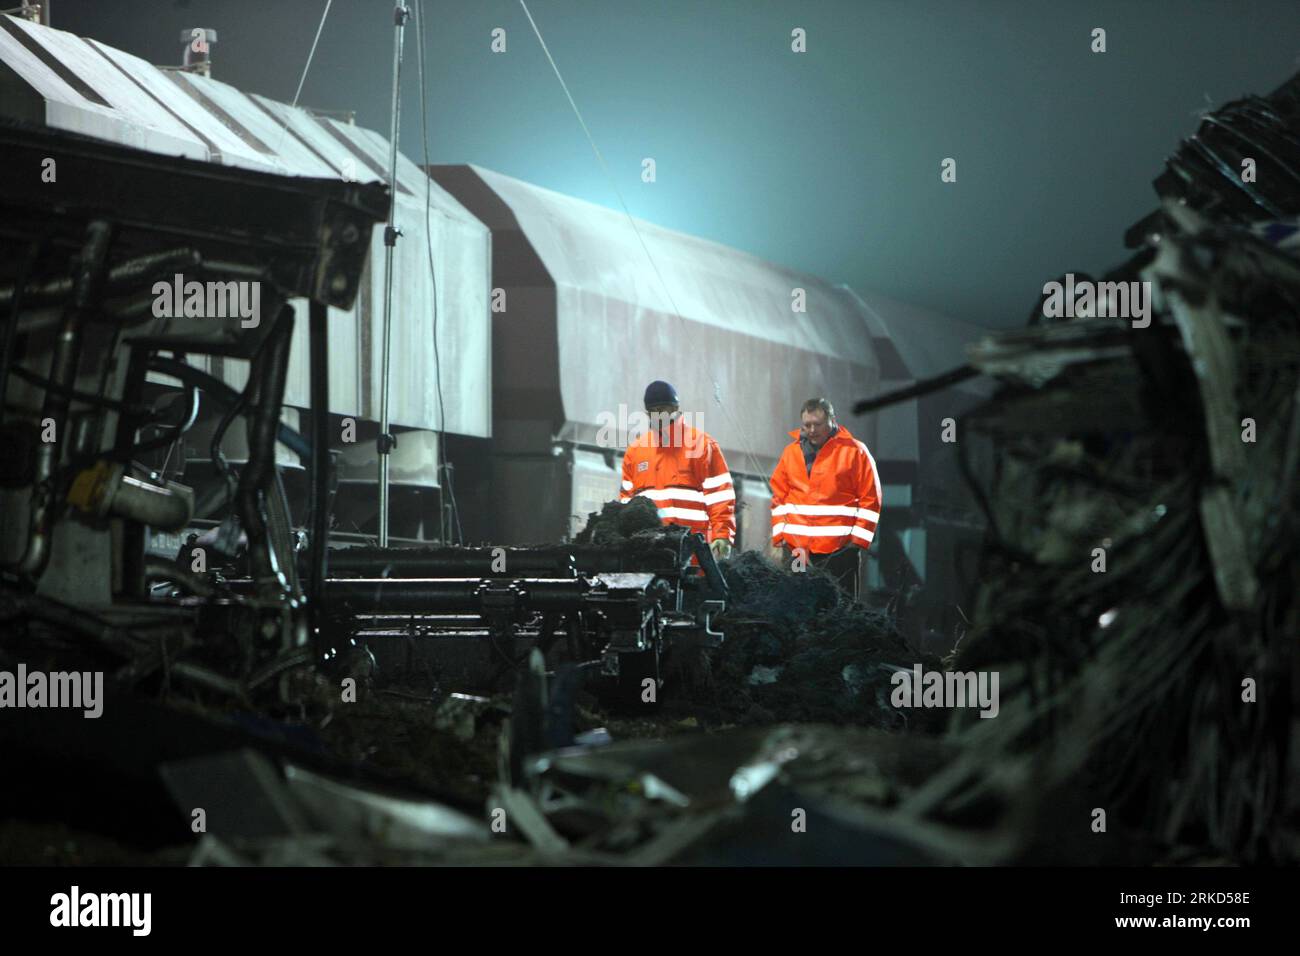 GER, Hordorf, Oschersleben - Jan. 30, 2011 Xinhua -- Rescuers work at the scene of a train collision accident in the Germany s eastern state Saxony-Anhalt on Jan. 30, 2011. A passenger and a freight train collided with each other here late Saturday, leaving at least 10 people dead and about 20 seriously injured, police said. Xinhua/Luo Huanhuan zf GERMANY-SAXONY-ANHALT-TRAIN COLLISION PUBLICATIONxNOTxINxCHN Stock Photo